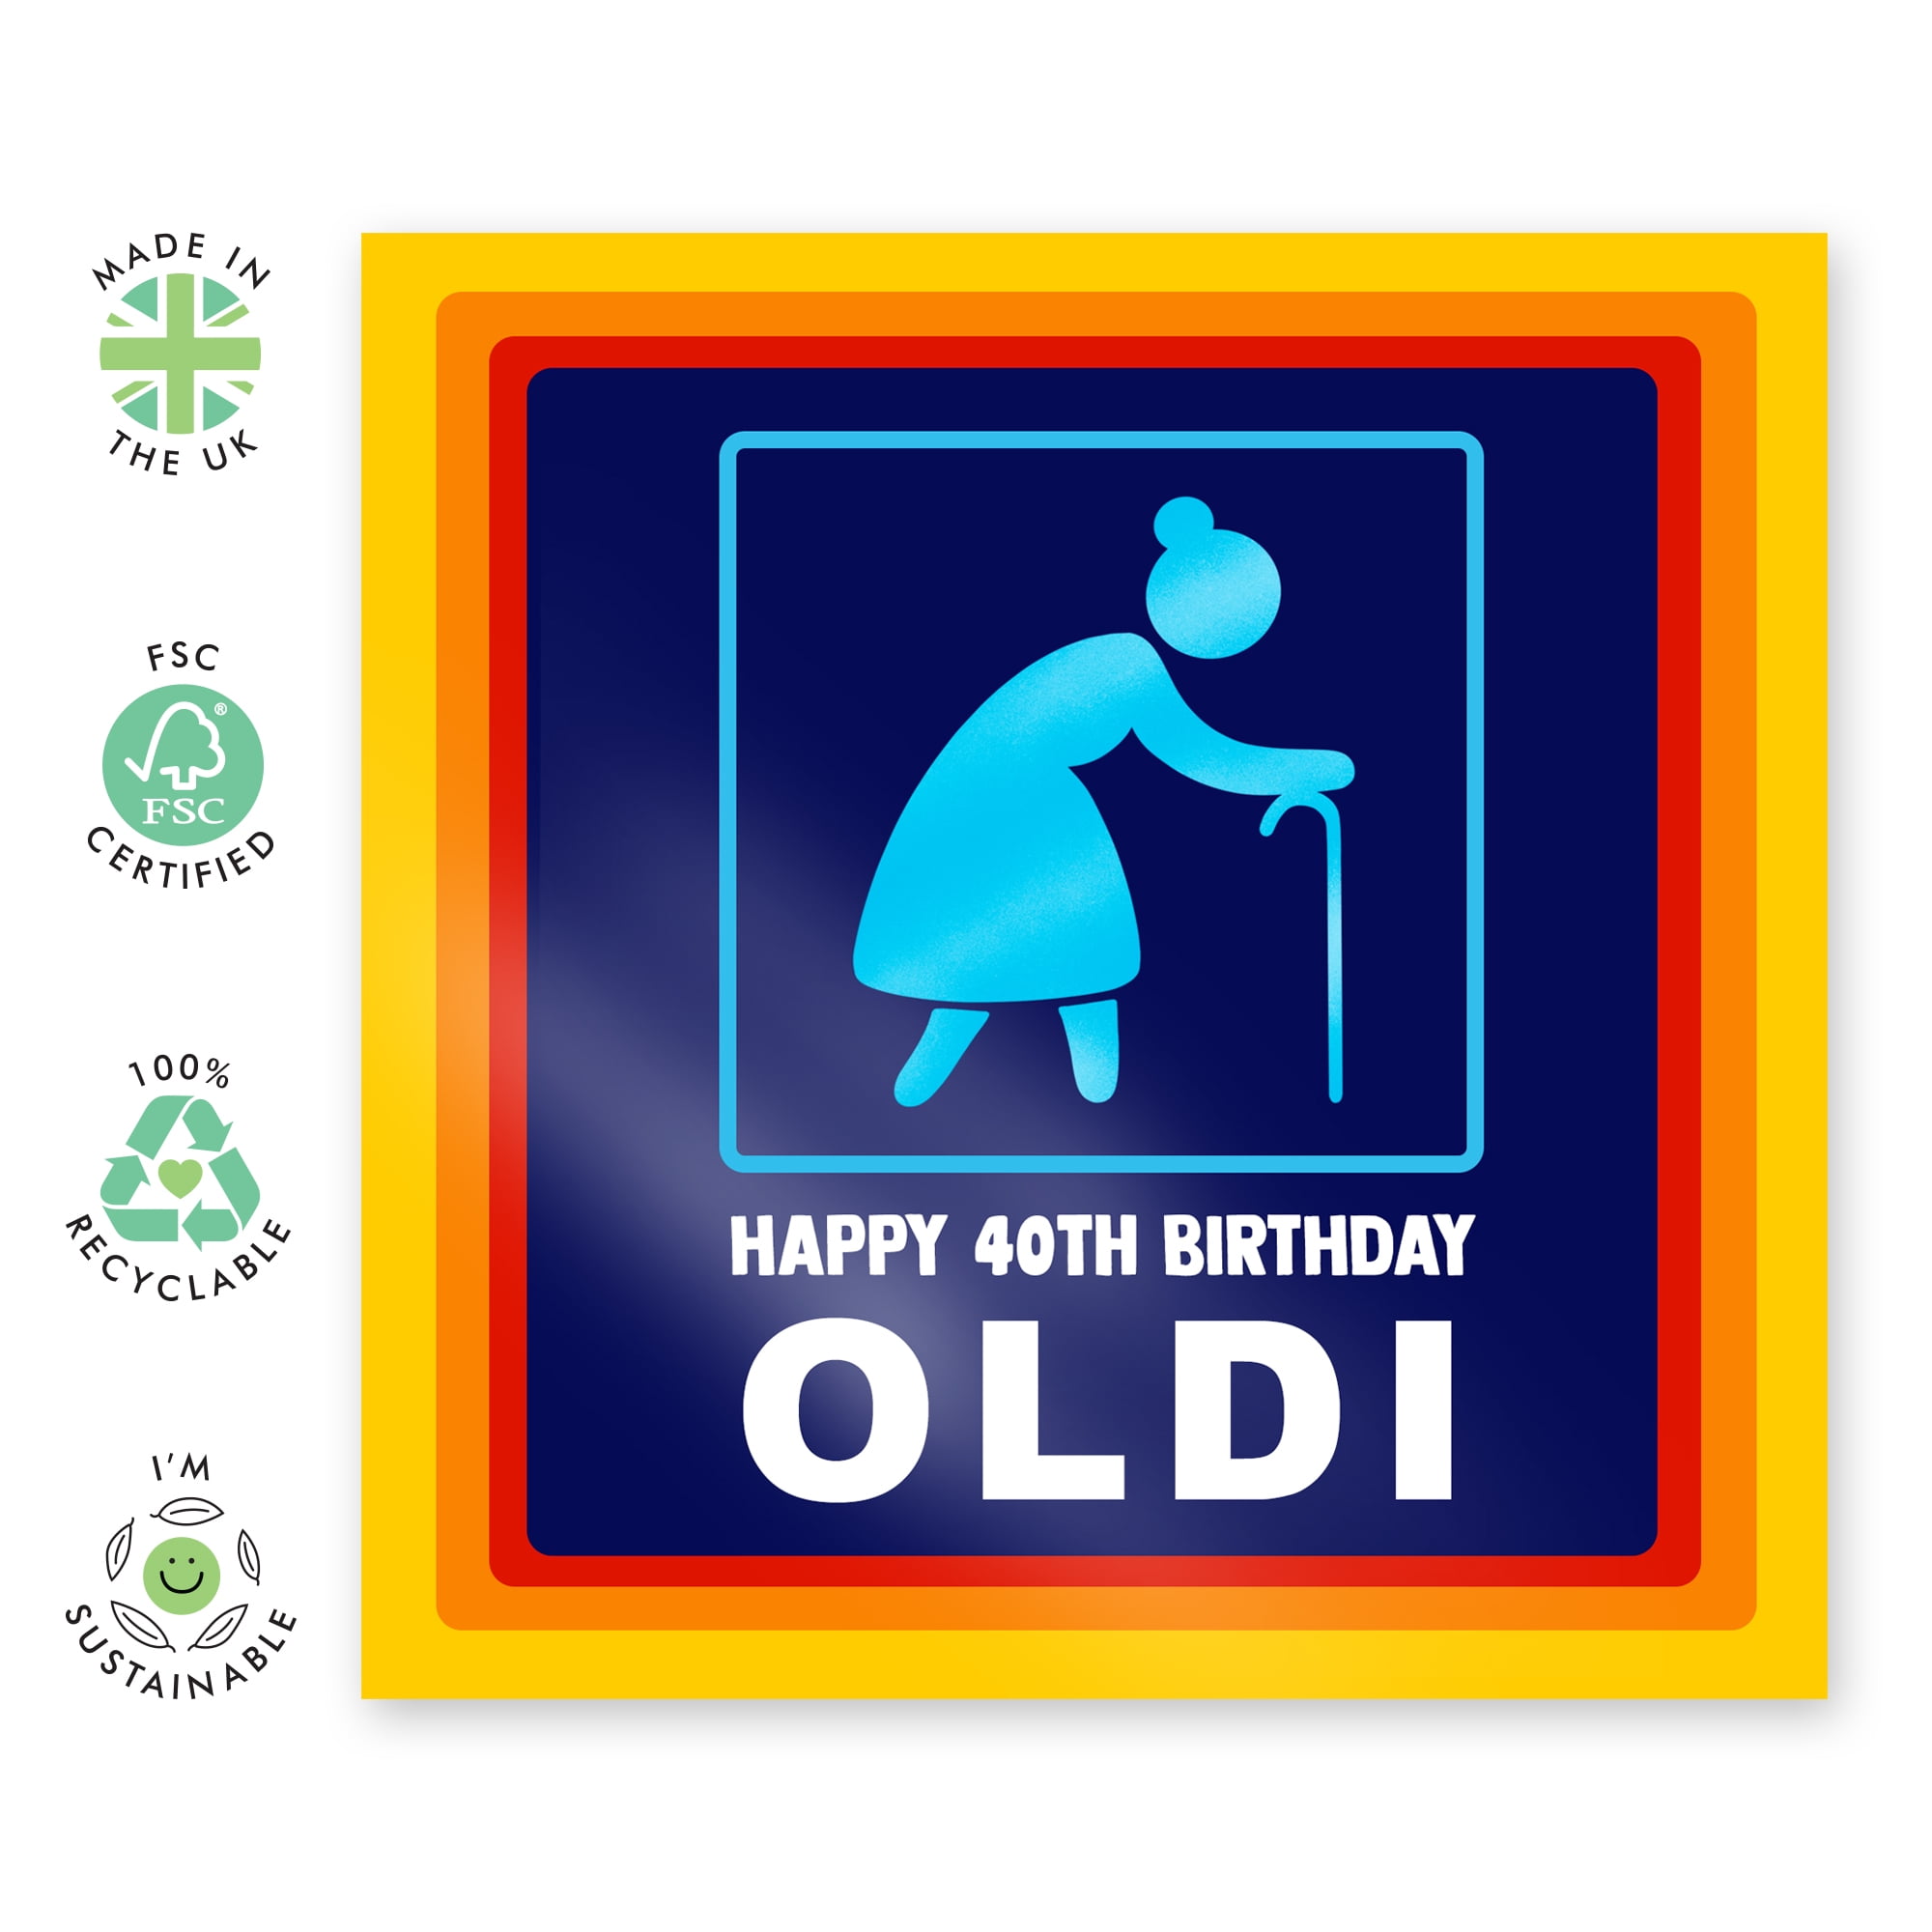 40th Birthday Card for Women - ' Happy 40th Birthday Oldi ' - Funny Gift for Her Fortieth - Birthday Cards for Wife Sister Mom Age 40 - Forties - Comes with Fun Stickers - By Central 23 - Walmart.com